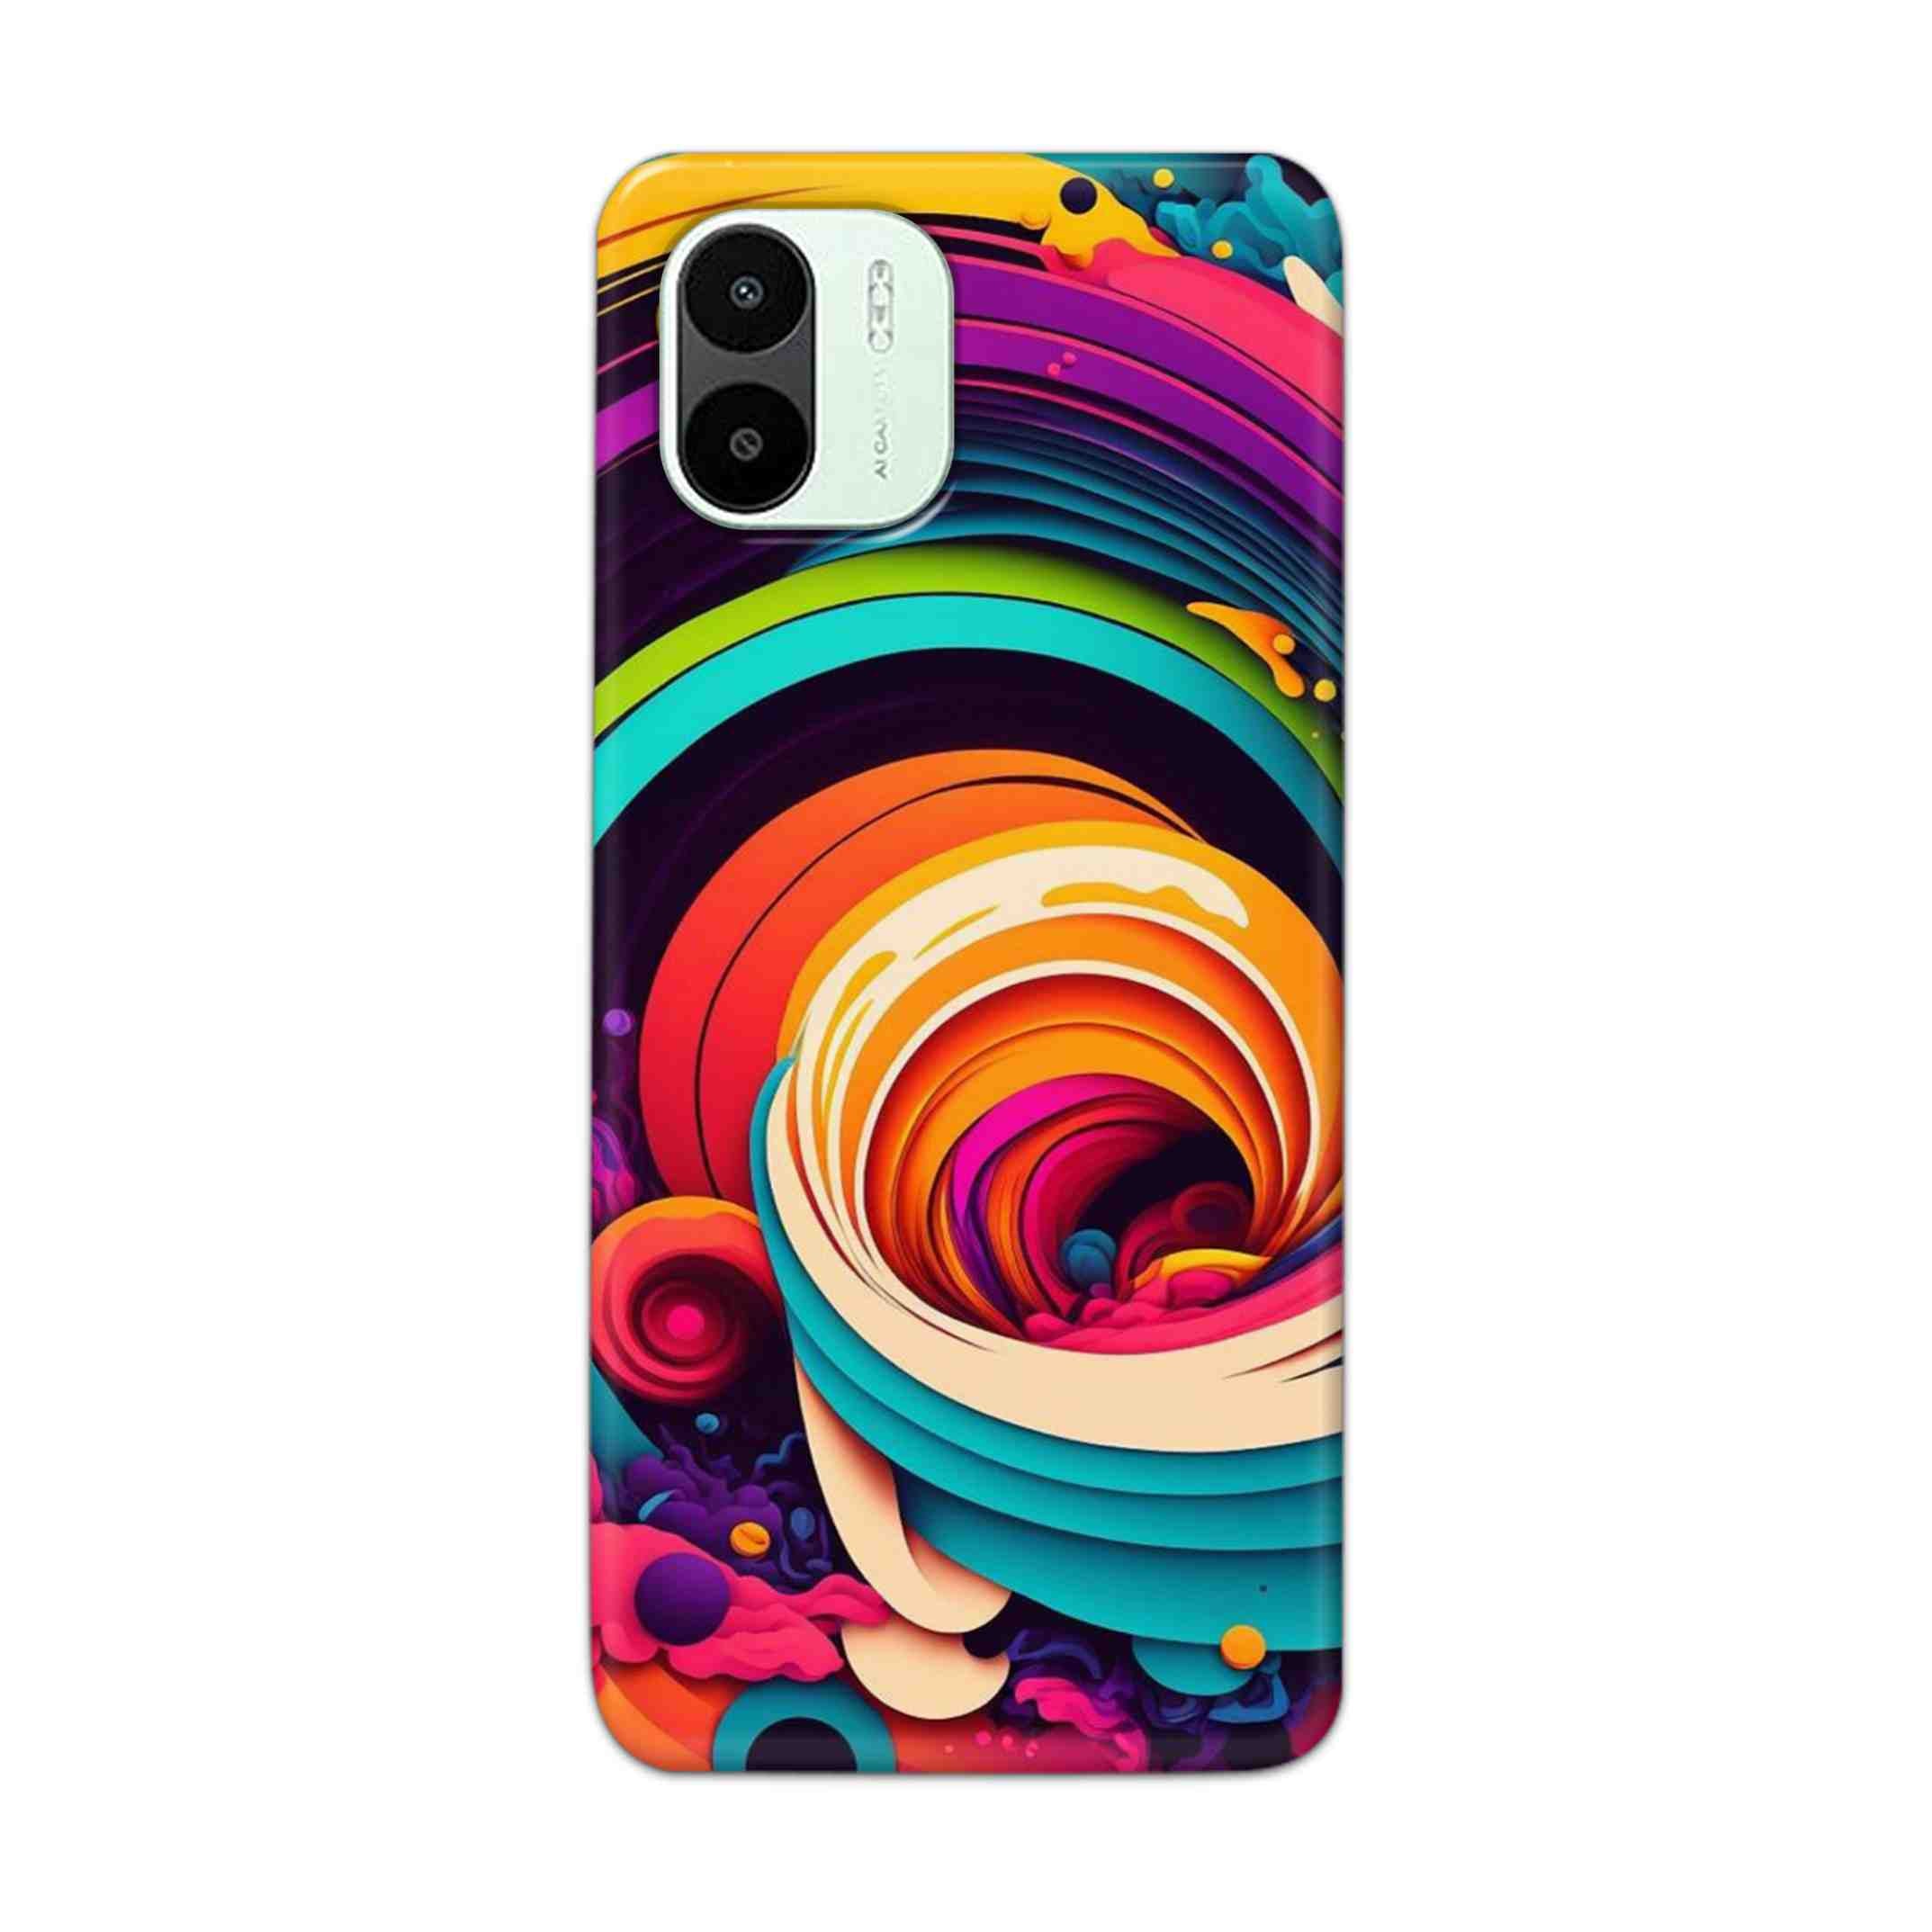 Buy Colour Circle Hard Back Mobile Phone Case Cover For Xiaomi Redmi A1 5G Online